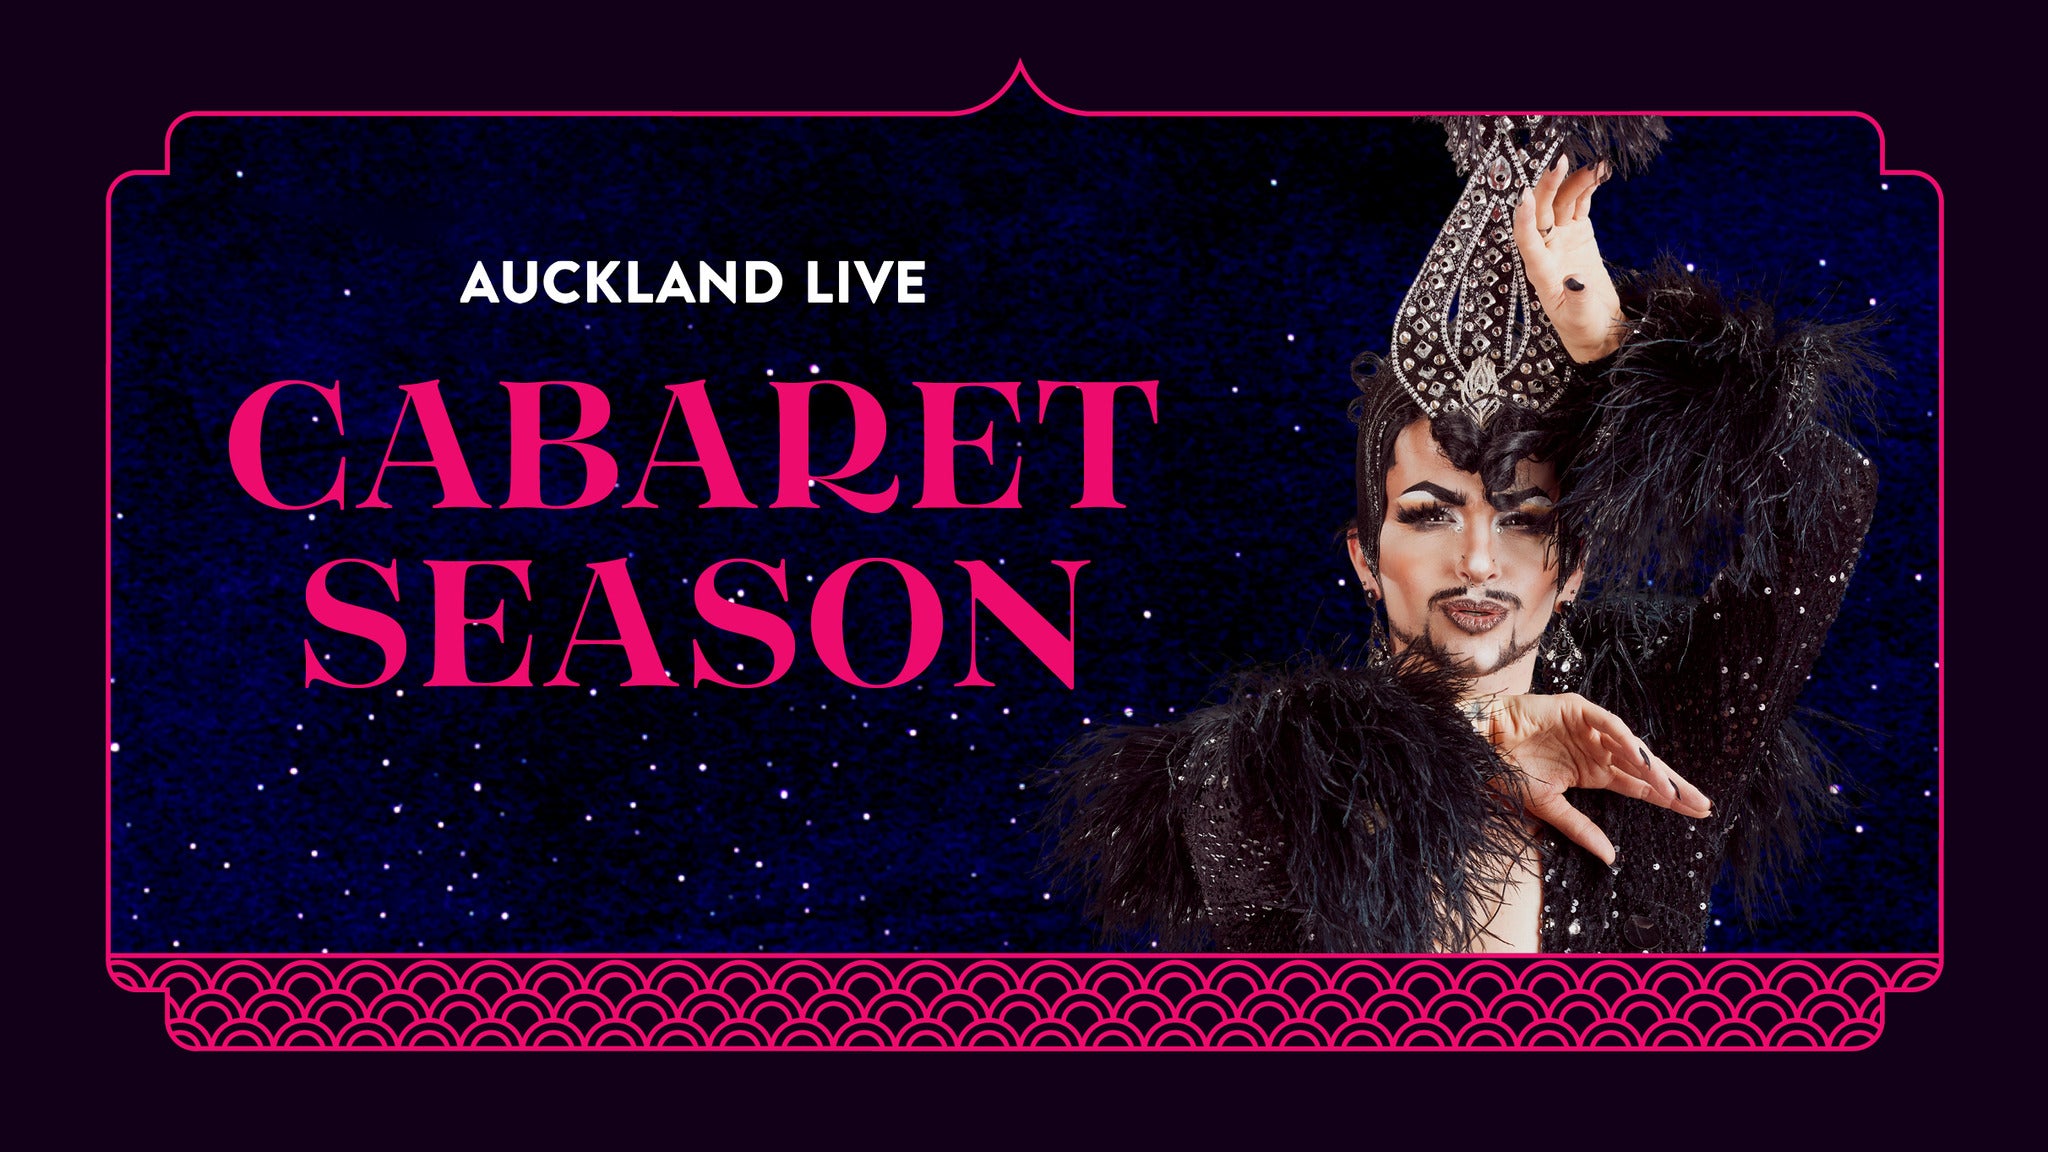 Image used with permission from Ticketmaster | Champagne & Cabaret with Kita & Anita tickets